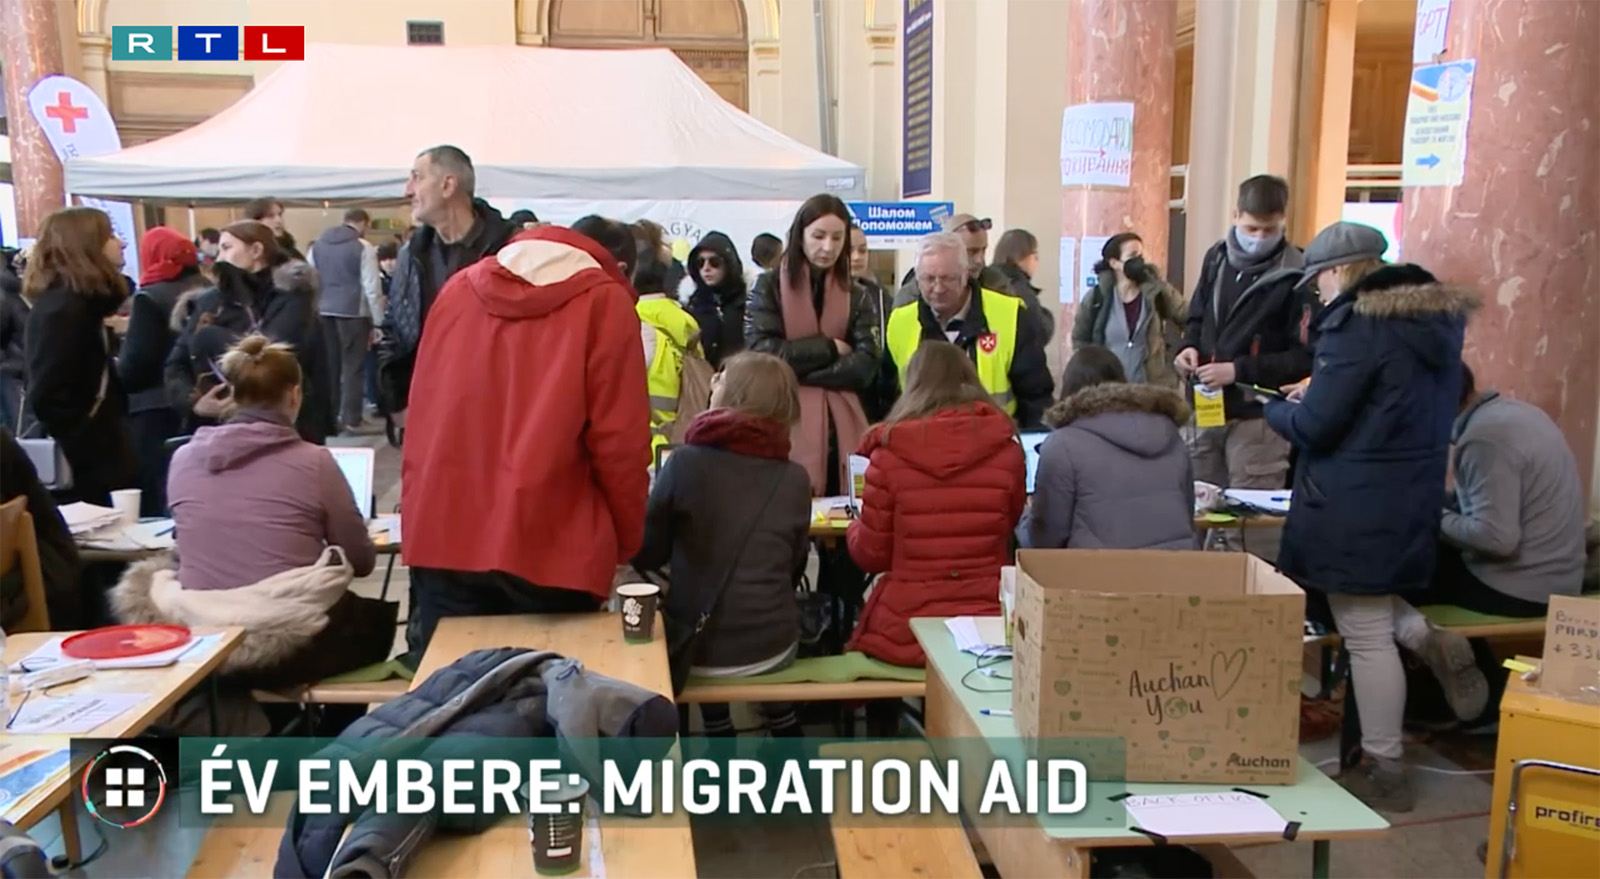 Migration Aid - We are nominated for the Man of the Year Award